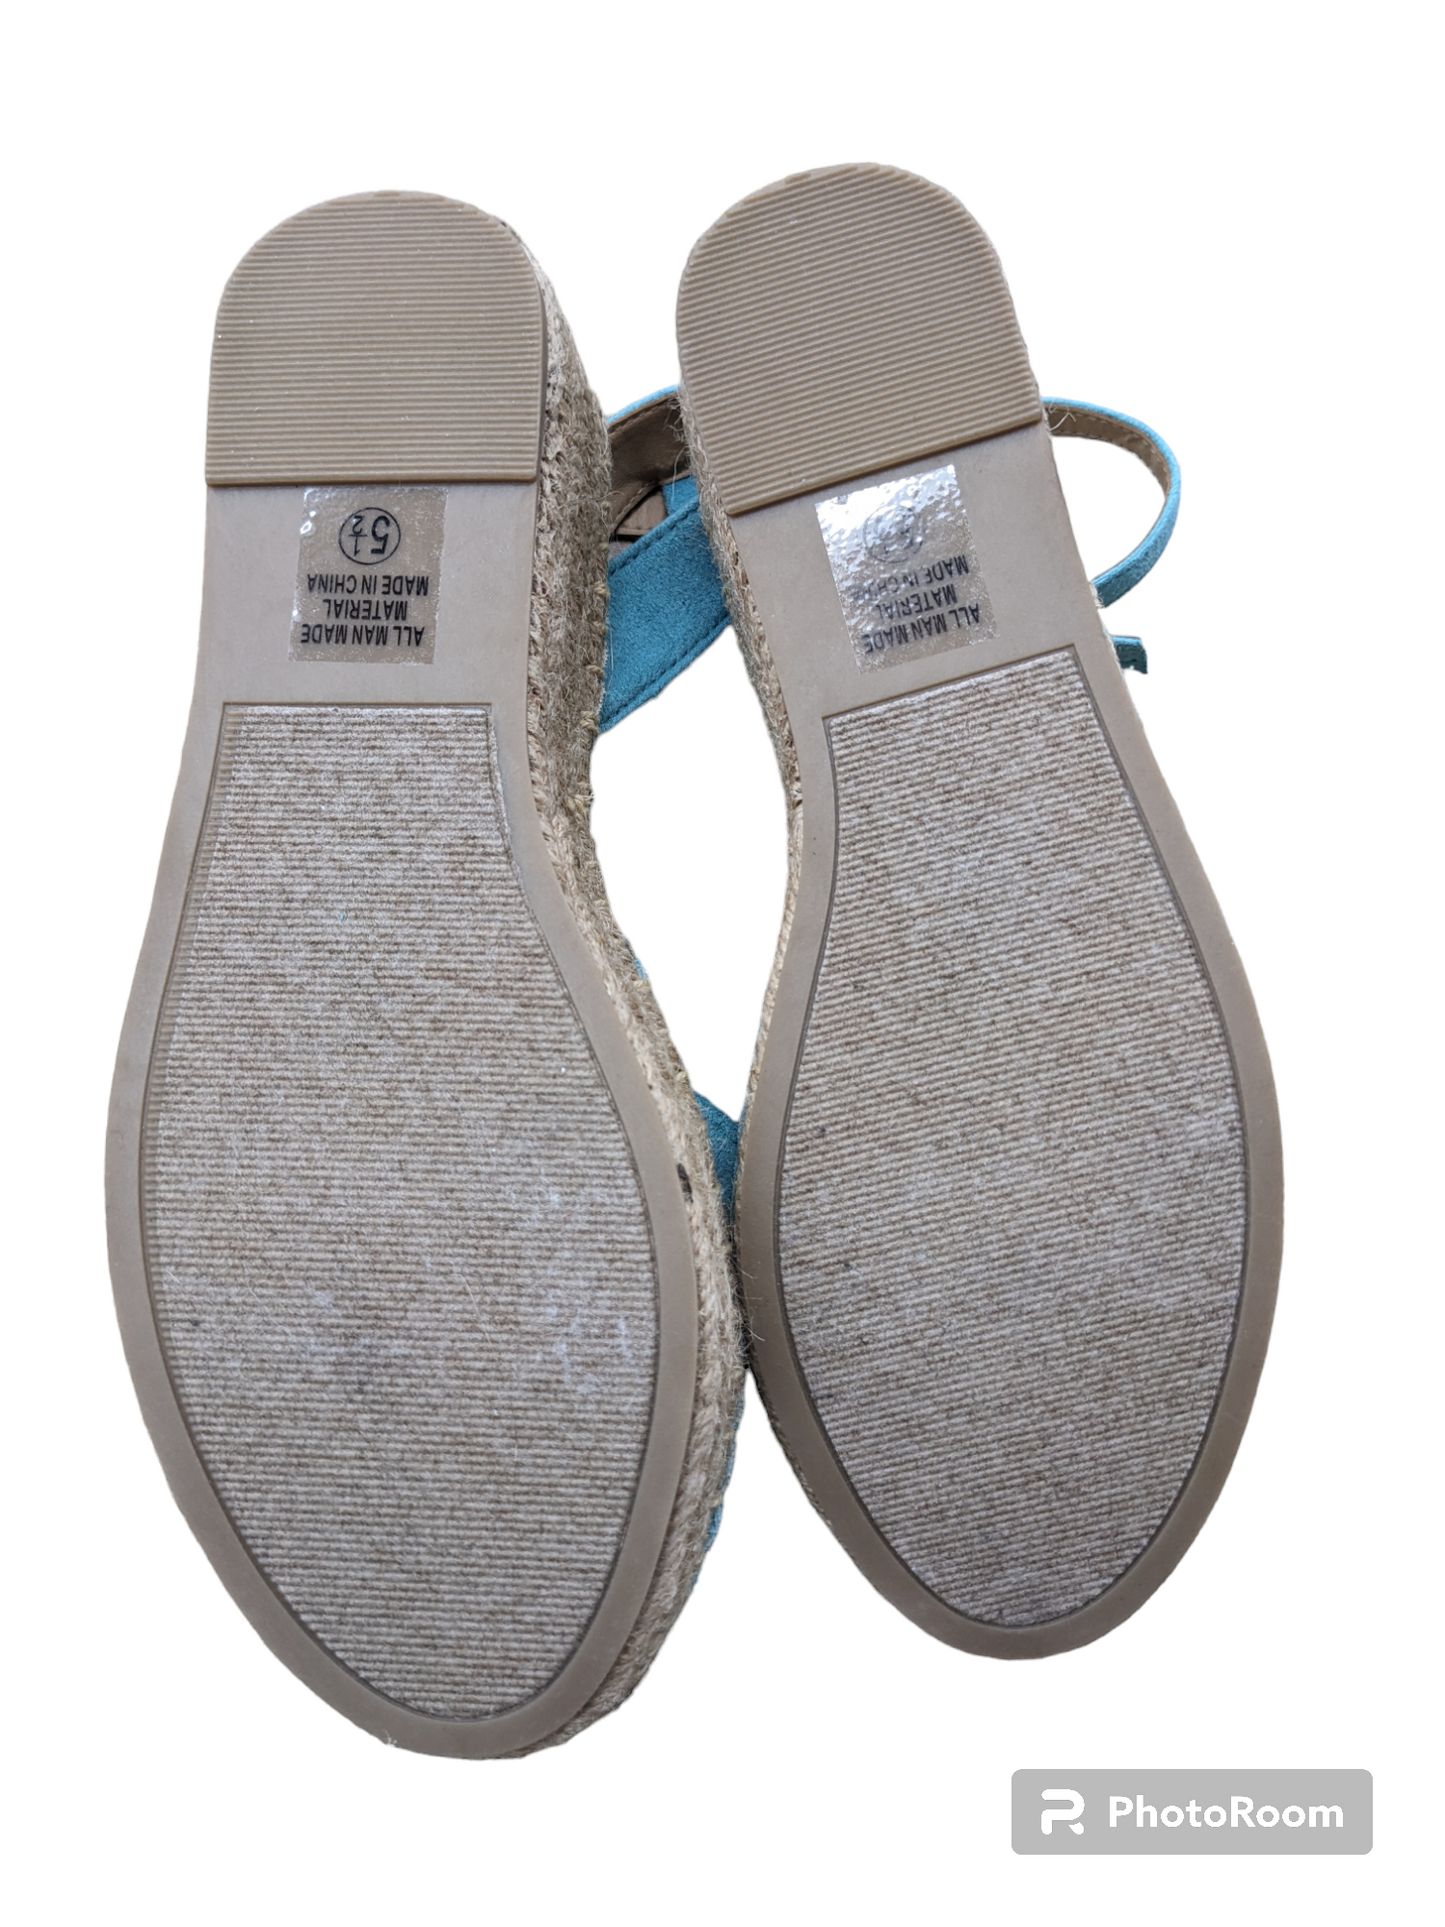 Shoes Flats Espadrille By Soda  Size: 5.5